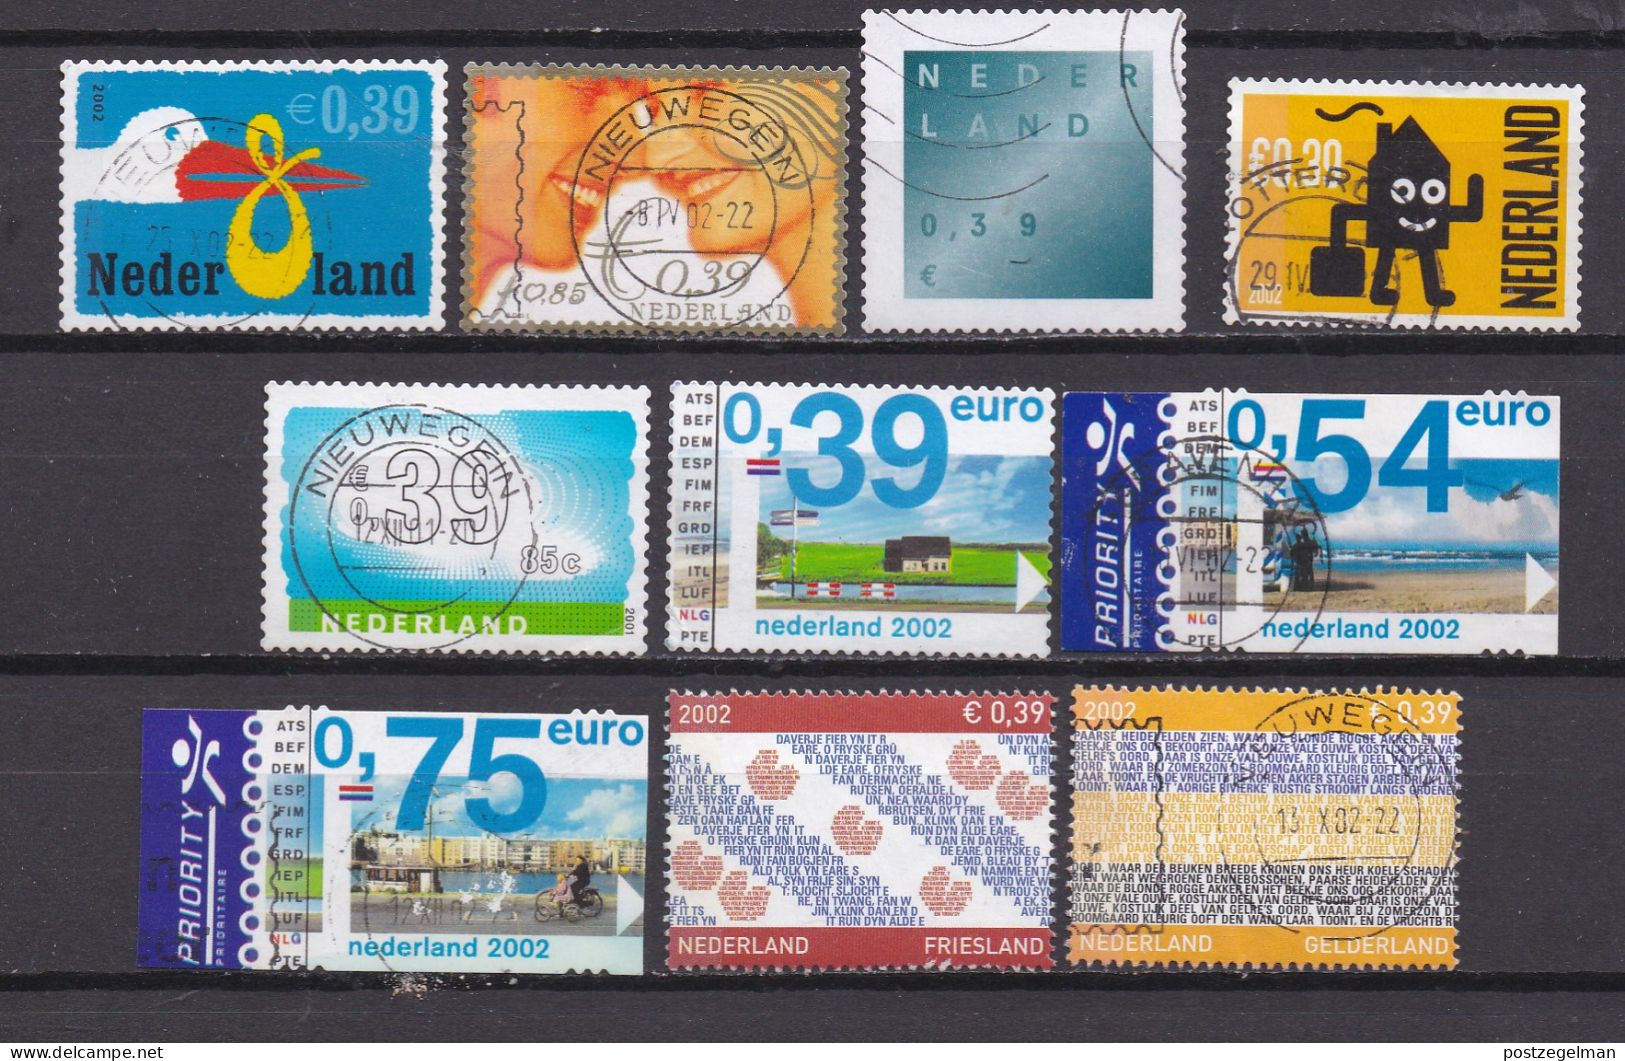 NETHERLANDS, 2002, Used Stamp(s) , Various Subjects , NVPH Nr. 2047=2102 , Scannr.18157 ,   10 Values - Usati